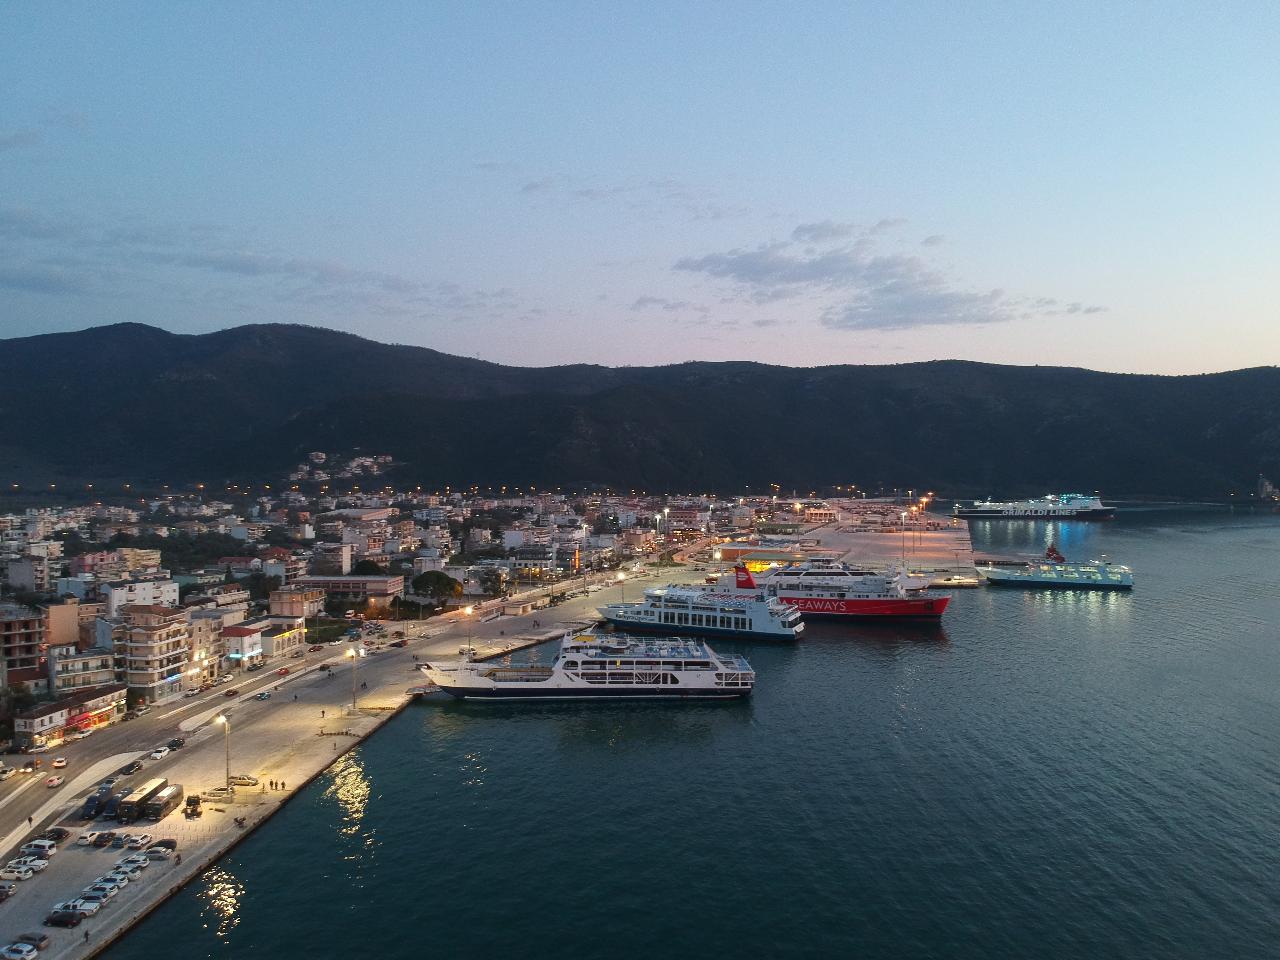 From central Igoumenitsa or port to central Athens or Athens International Airport